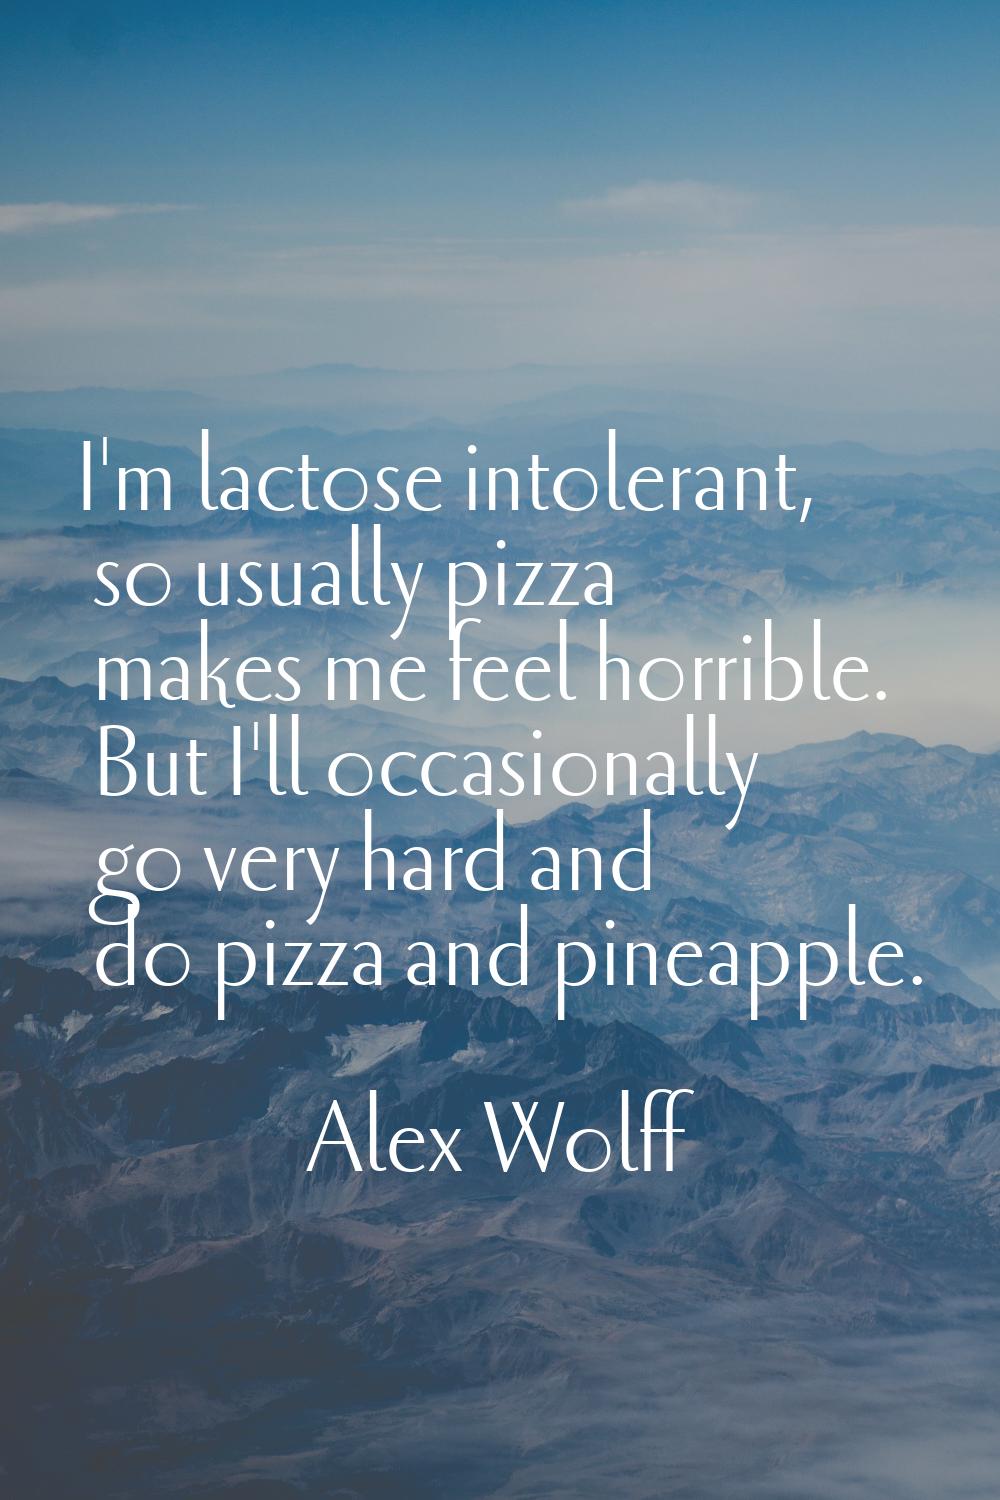 I'm lactose intolerant, so usually pizza makes me feel horrible. But I'll occasionally go very hard